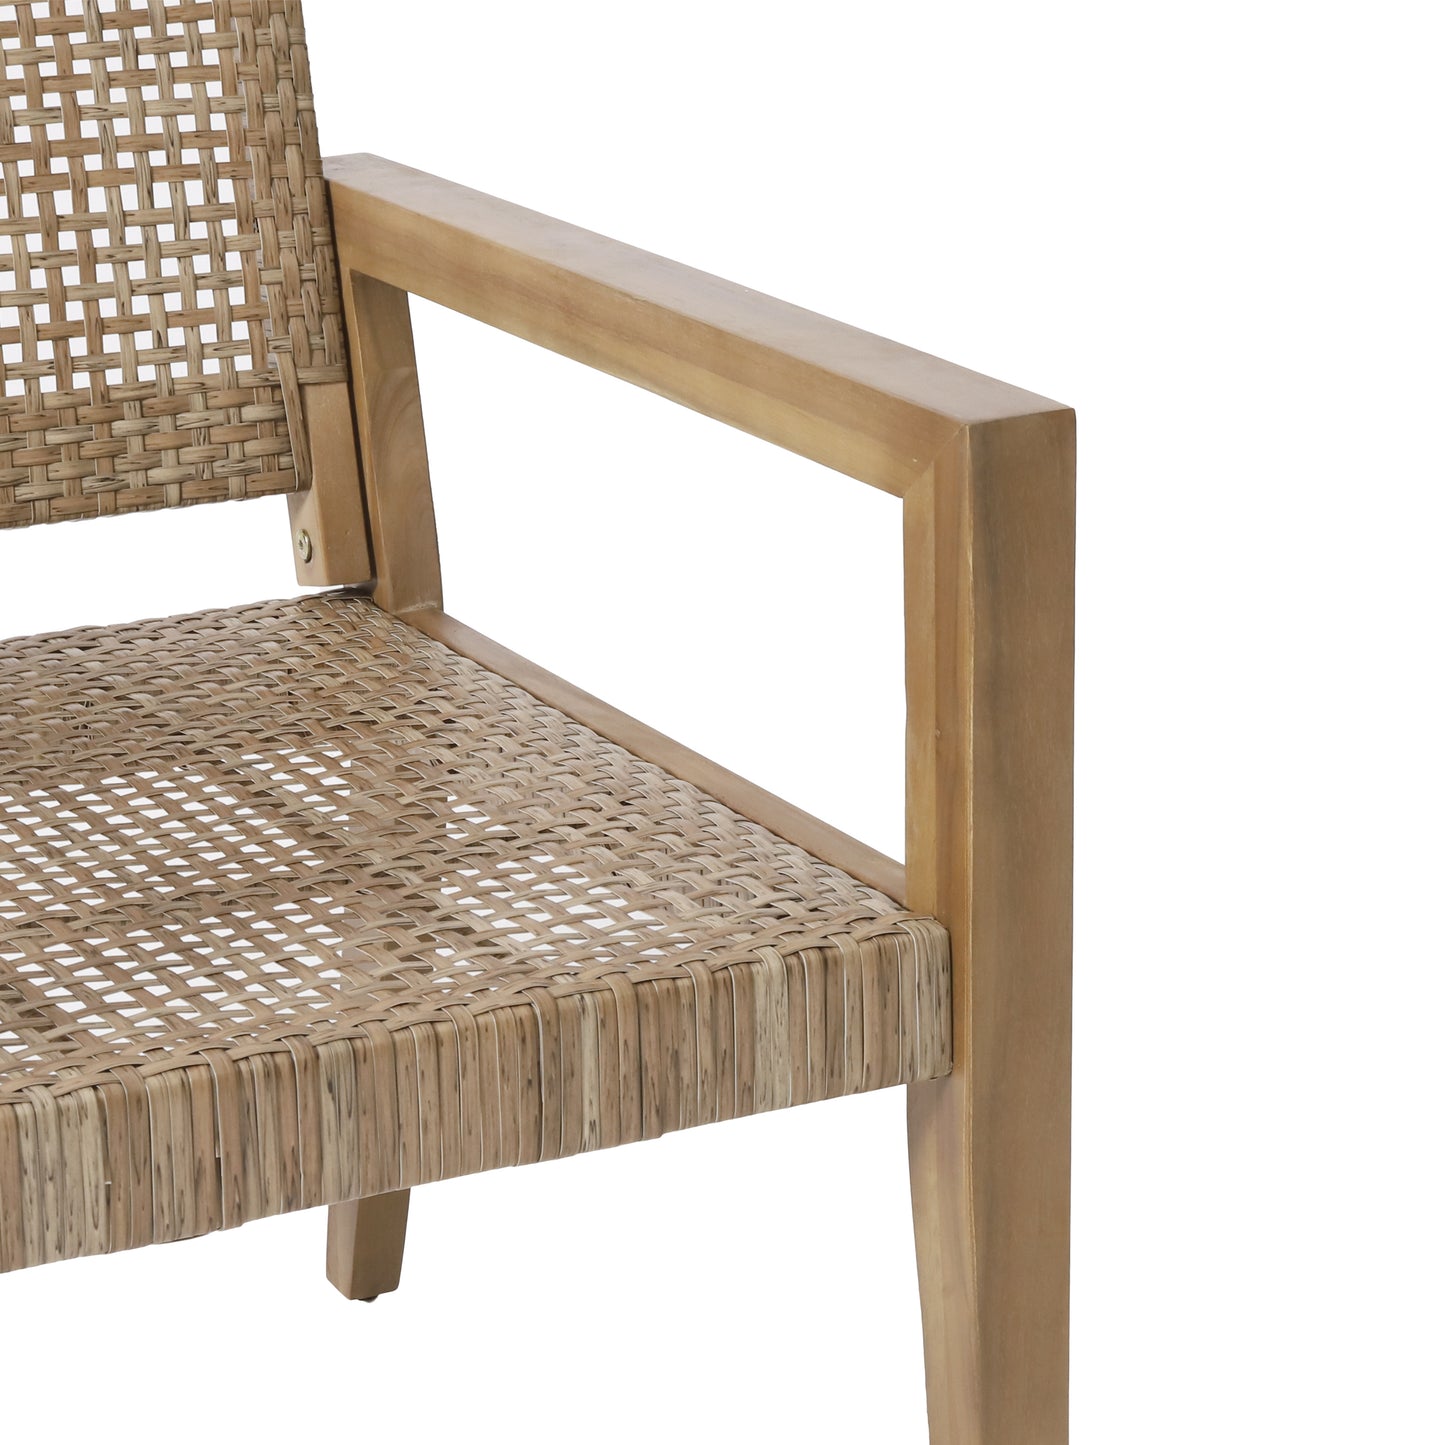 Elmcrest Outdoor Wicker and Acacia Wood Club Chairs, Set of 2, Light Multibrown and Light Brown